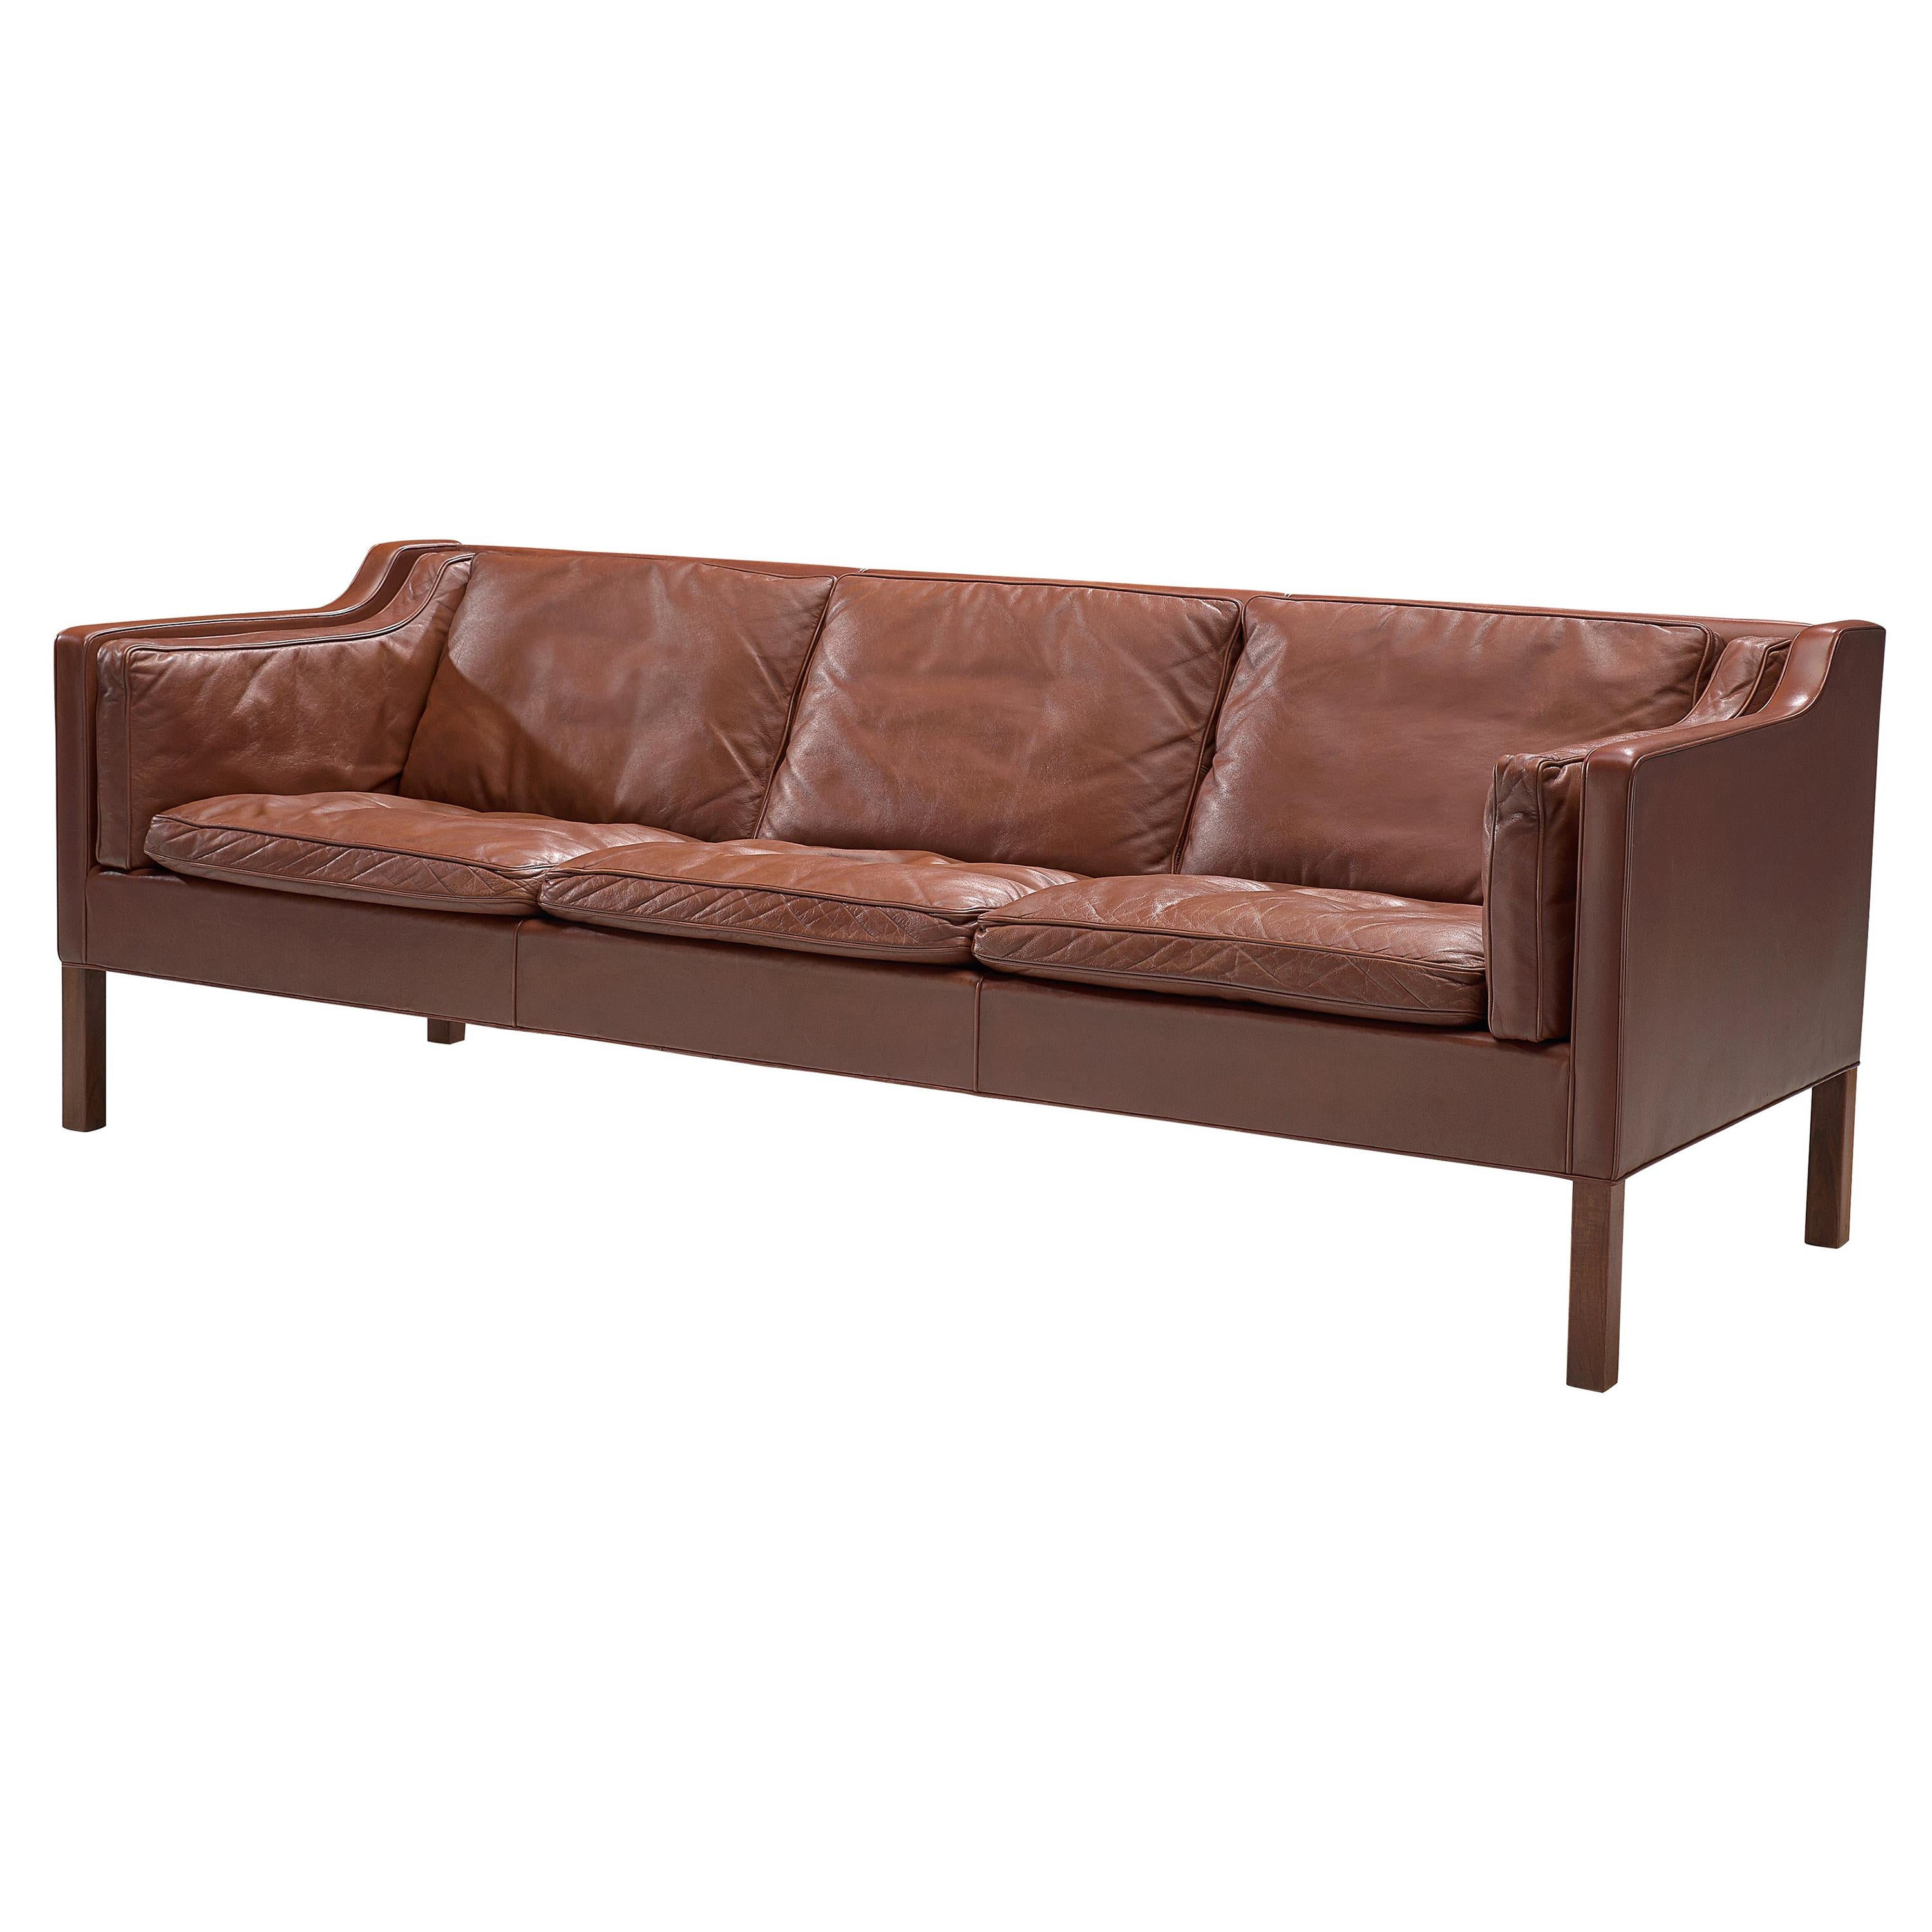 Børge Mogensen 2213 Sofa in Brown Leather For Sale at 1stDibs